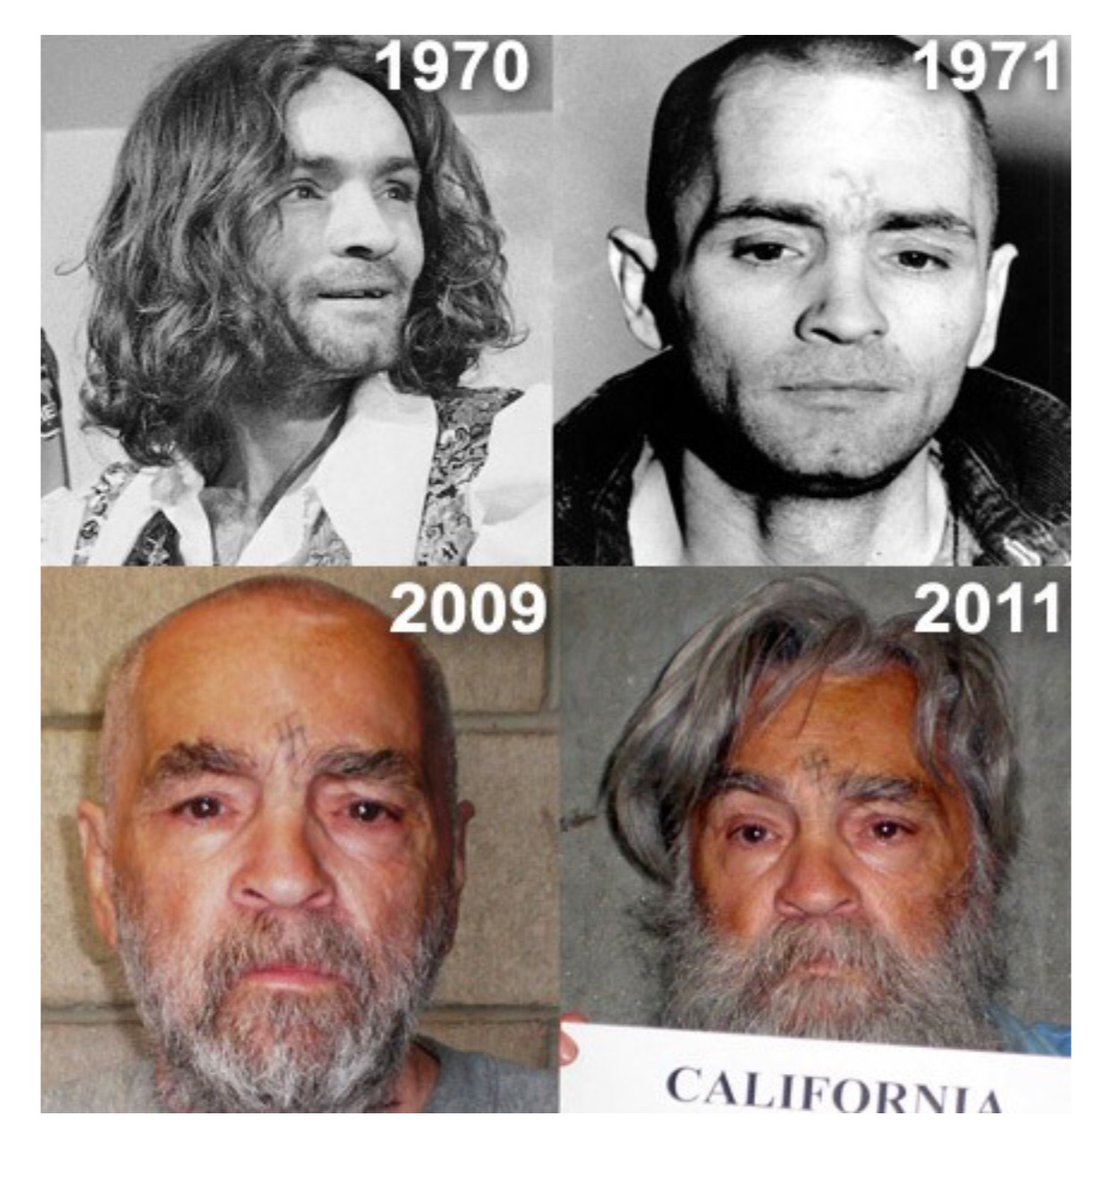 17 of 25We can see Manson’s swastika tatoo on his forehead changes directions after 1971. It also appears to be different between 09 & 11. That’s penciled on, he doesn’t wear that out in public. Also almost looks a little white around his eyes in 11, sunglasses? 